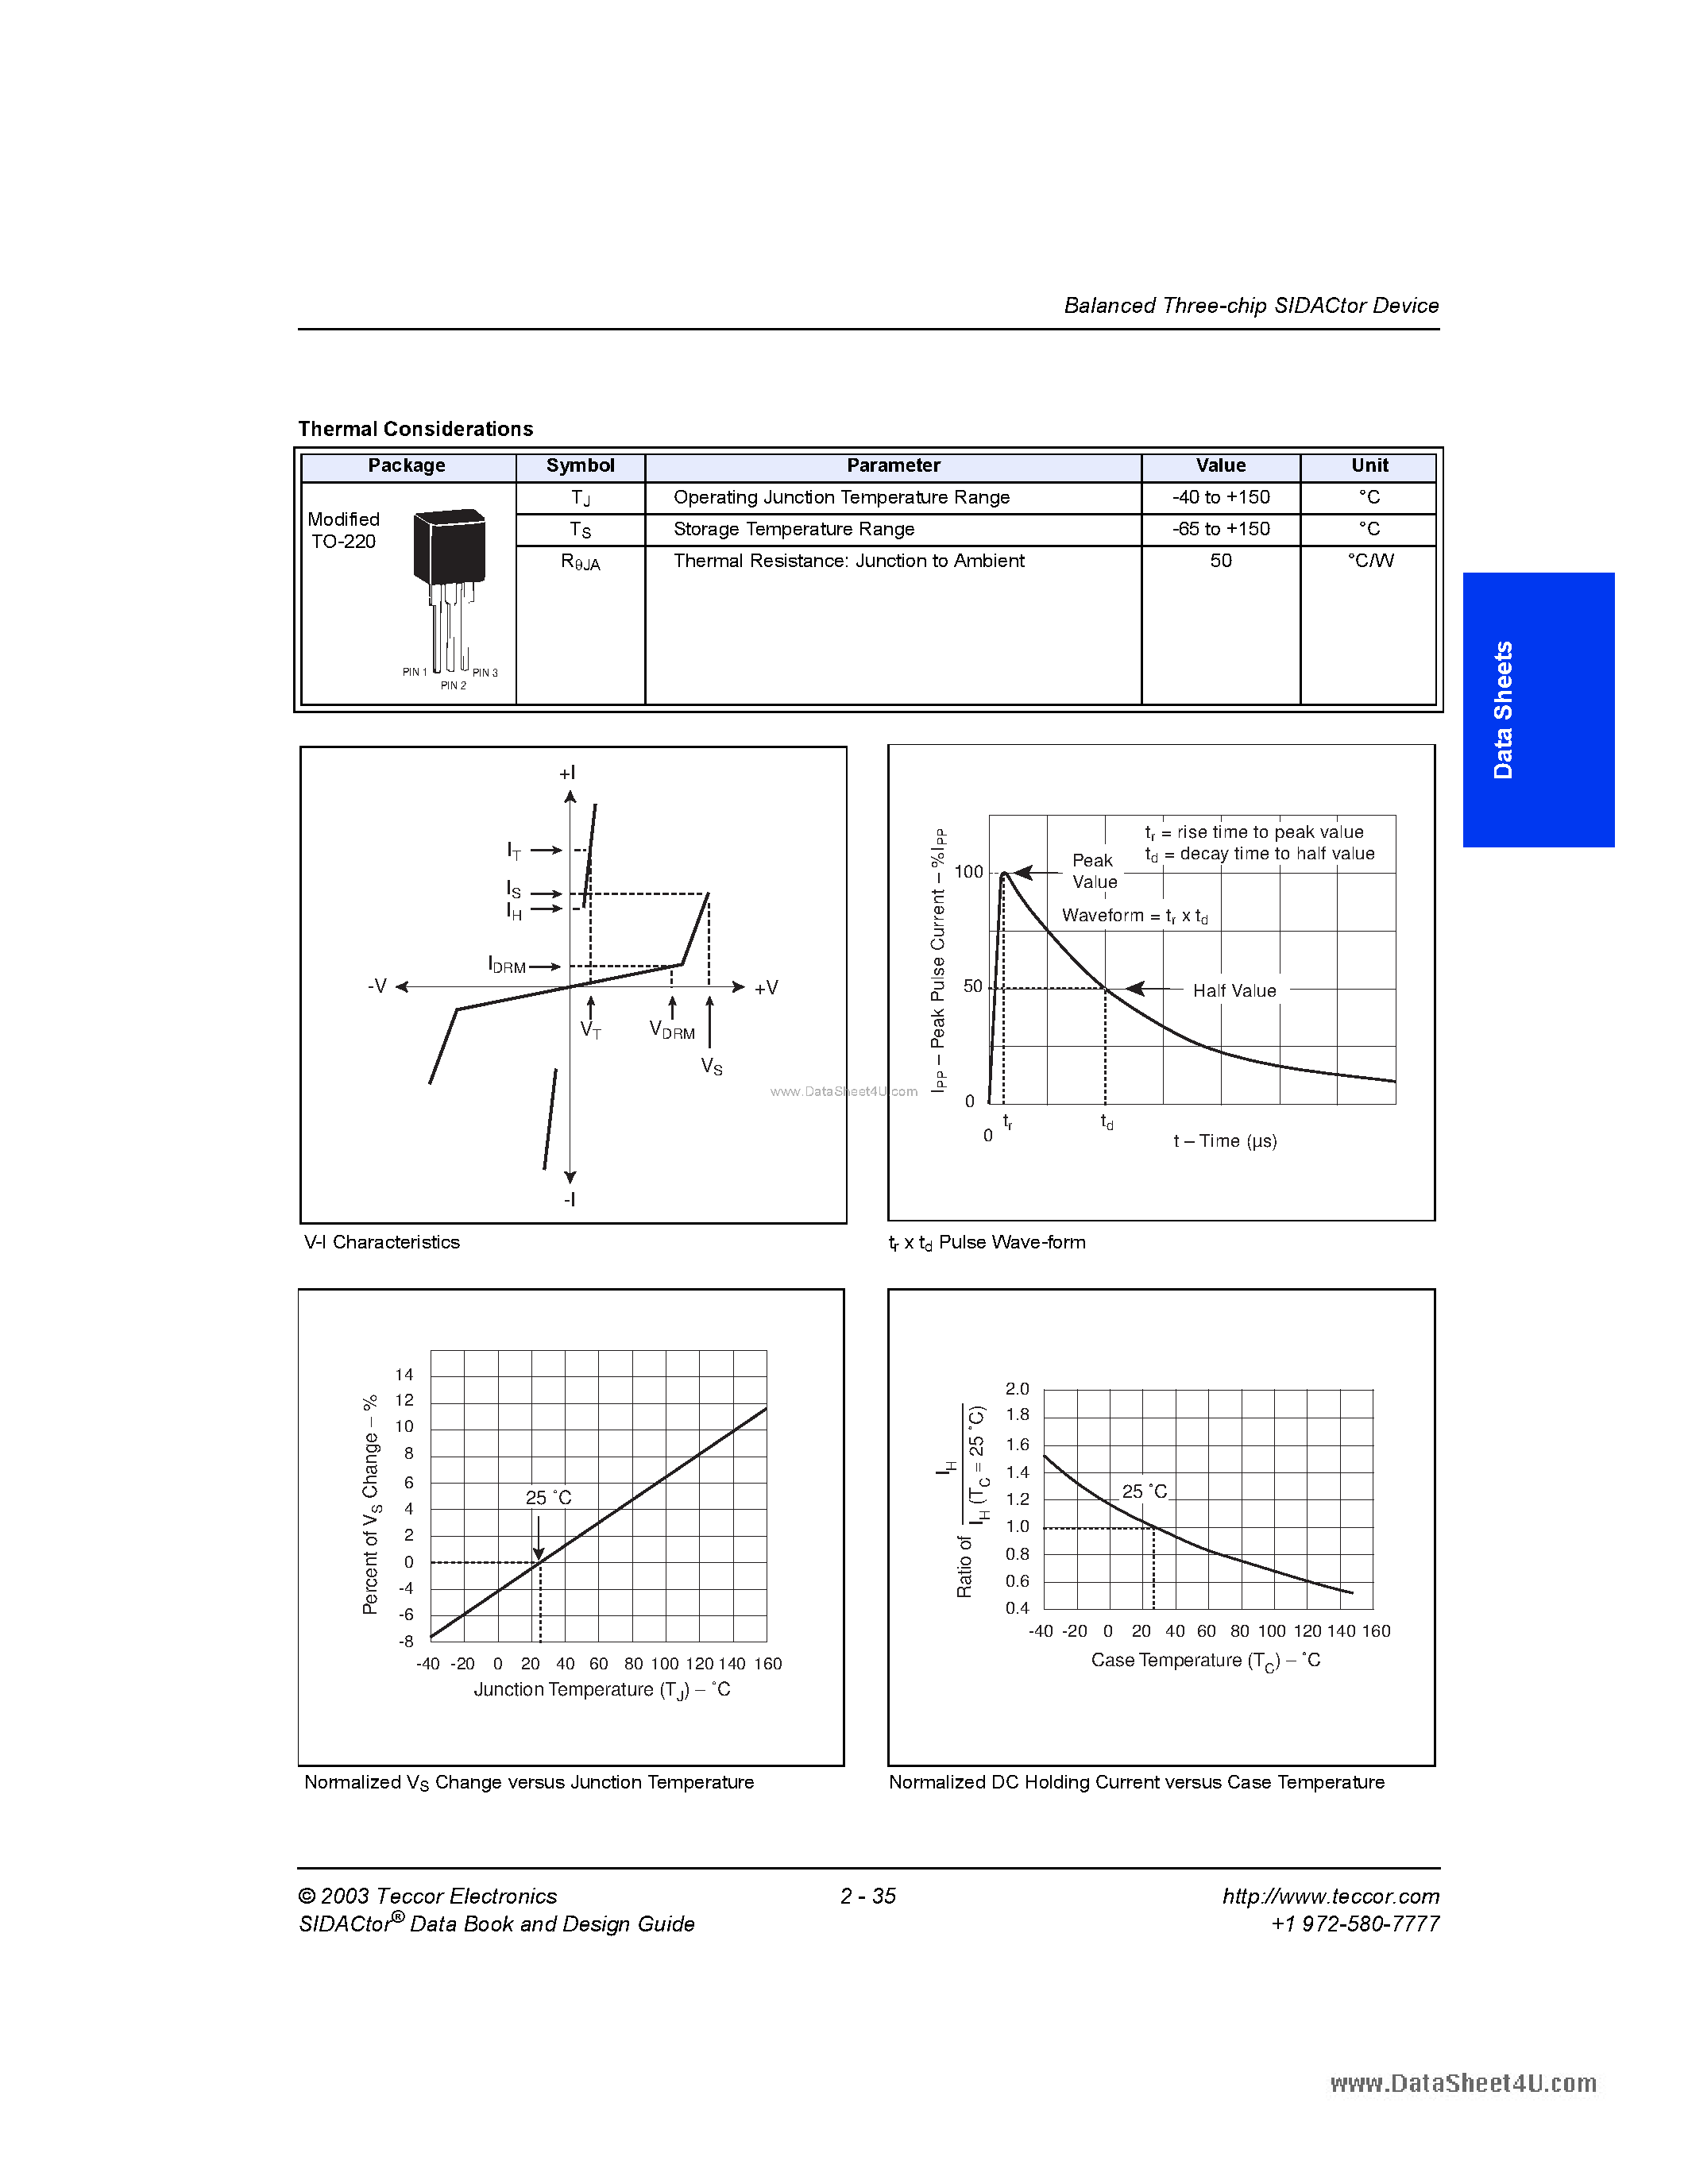 Datasheet A2106A - solid state crowbar devices page 2